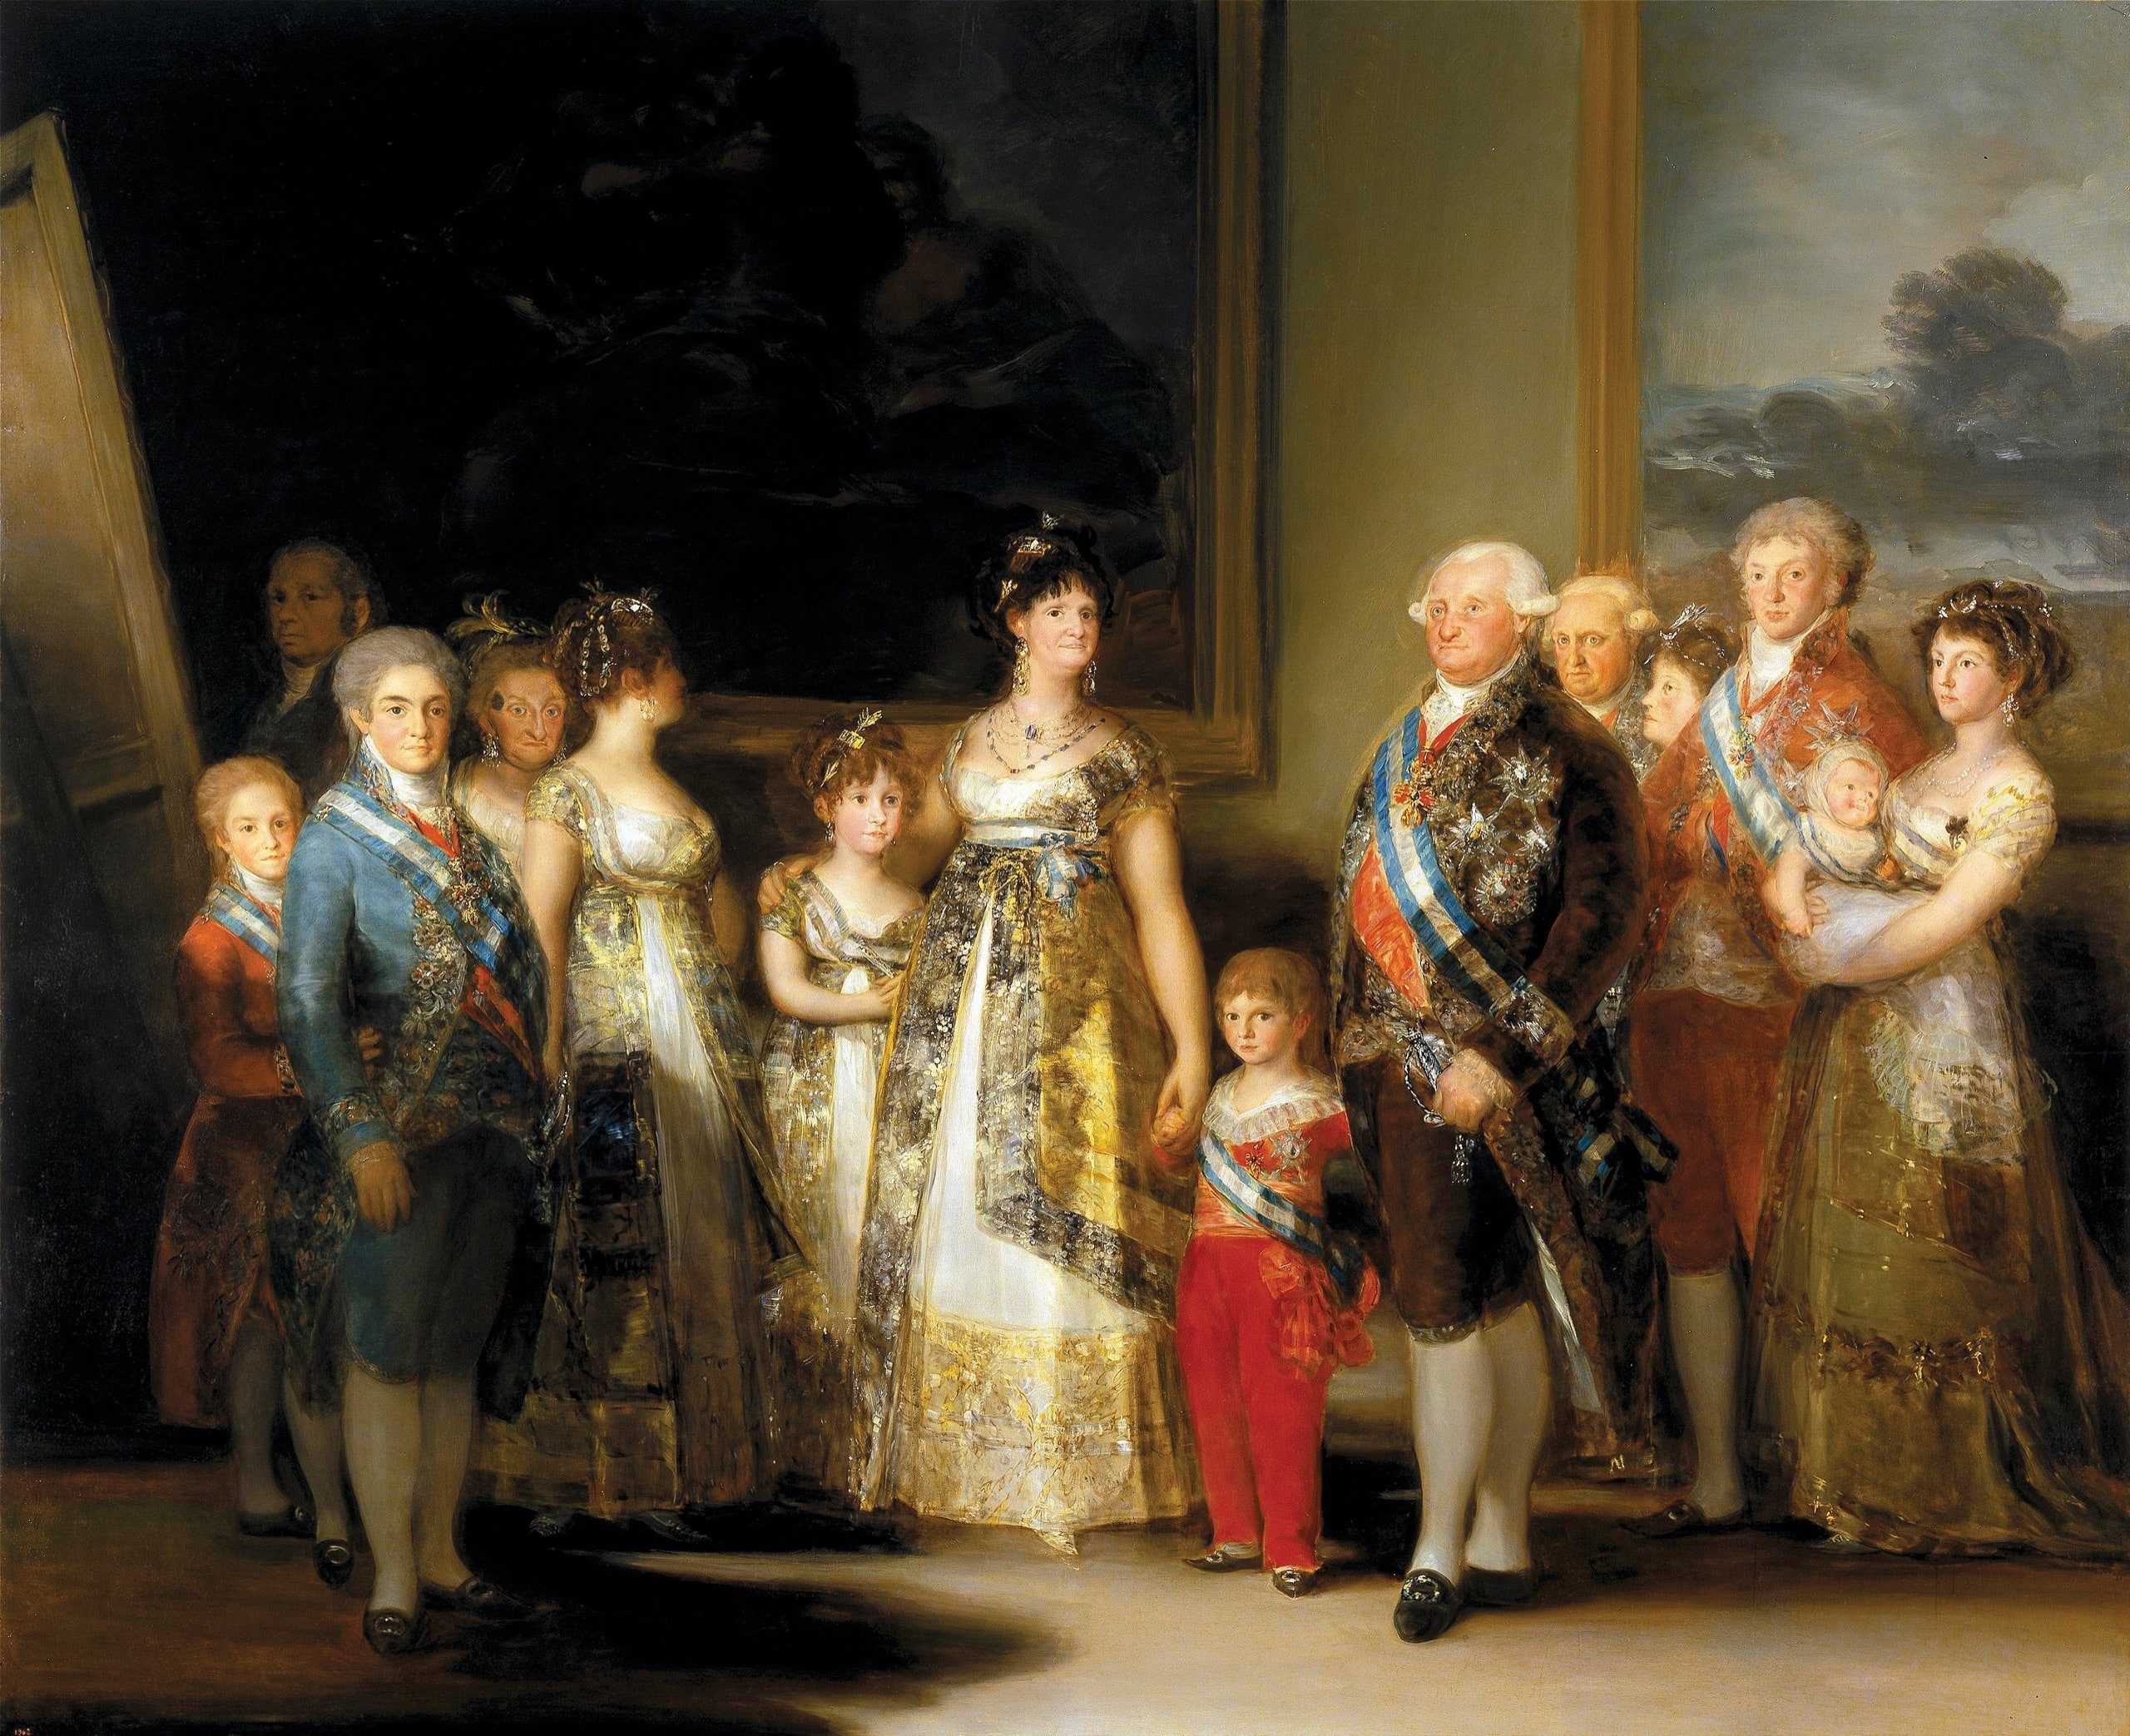 Find out more about Francisco Goya - The Family of Carlos IV